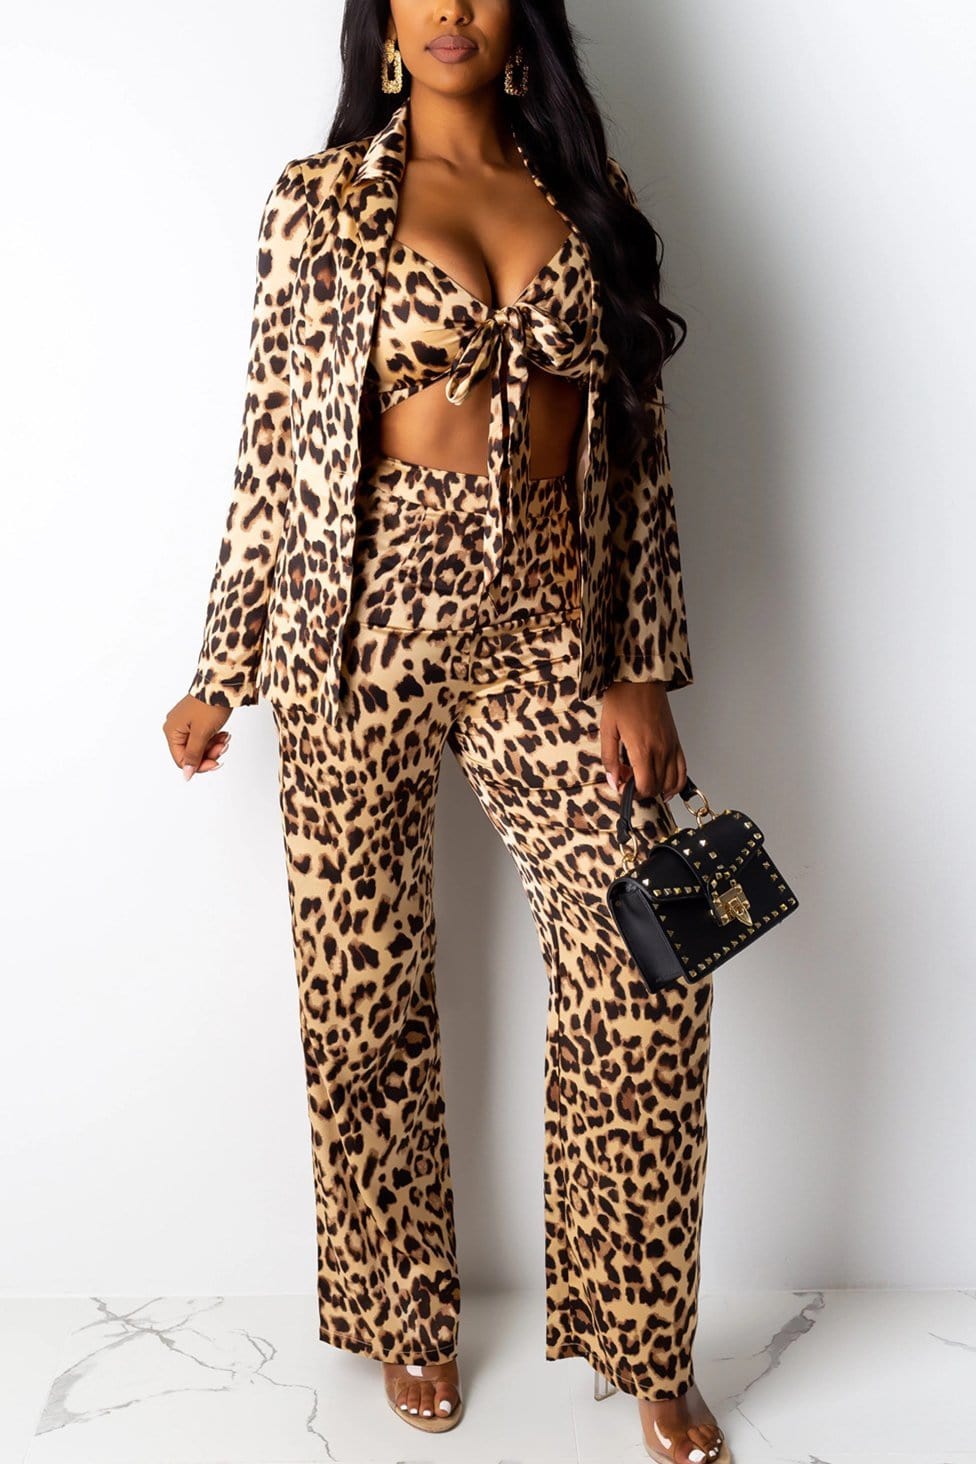 fashion-trousers-tube-top-leopard-three-pieces-suit